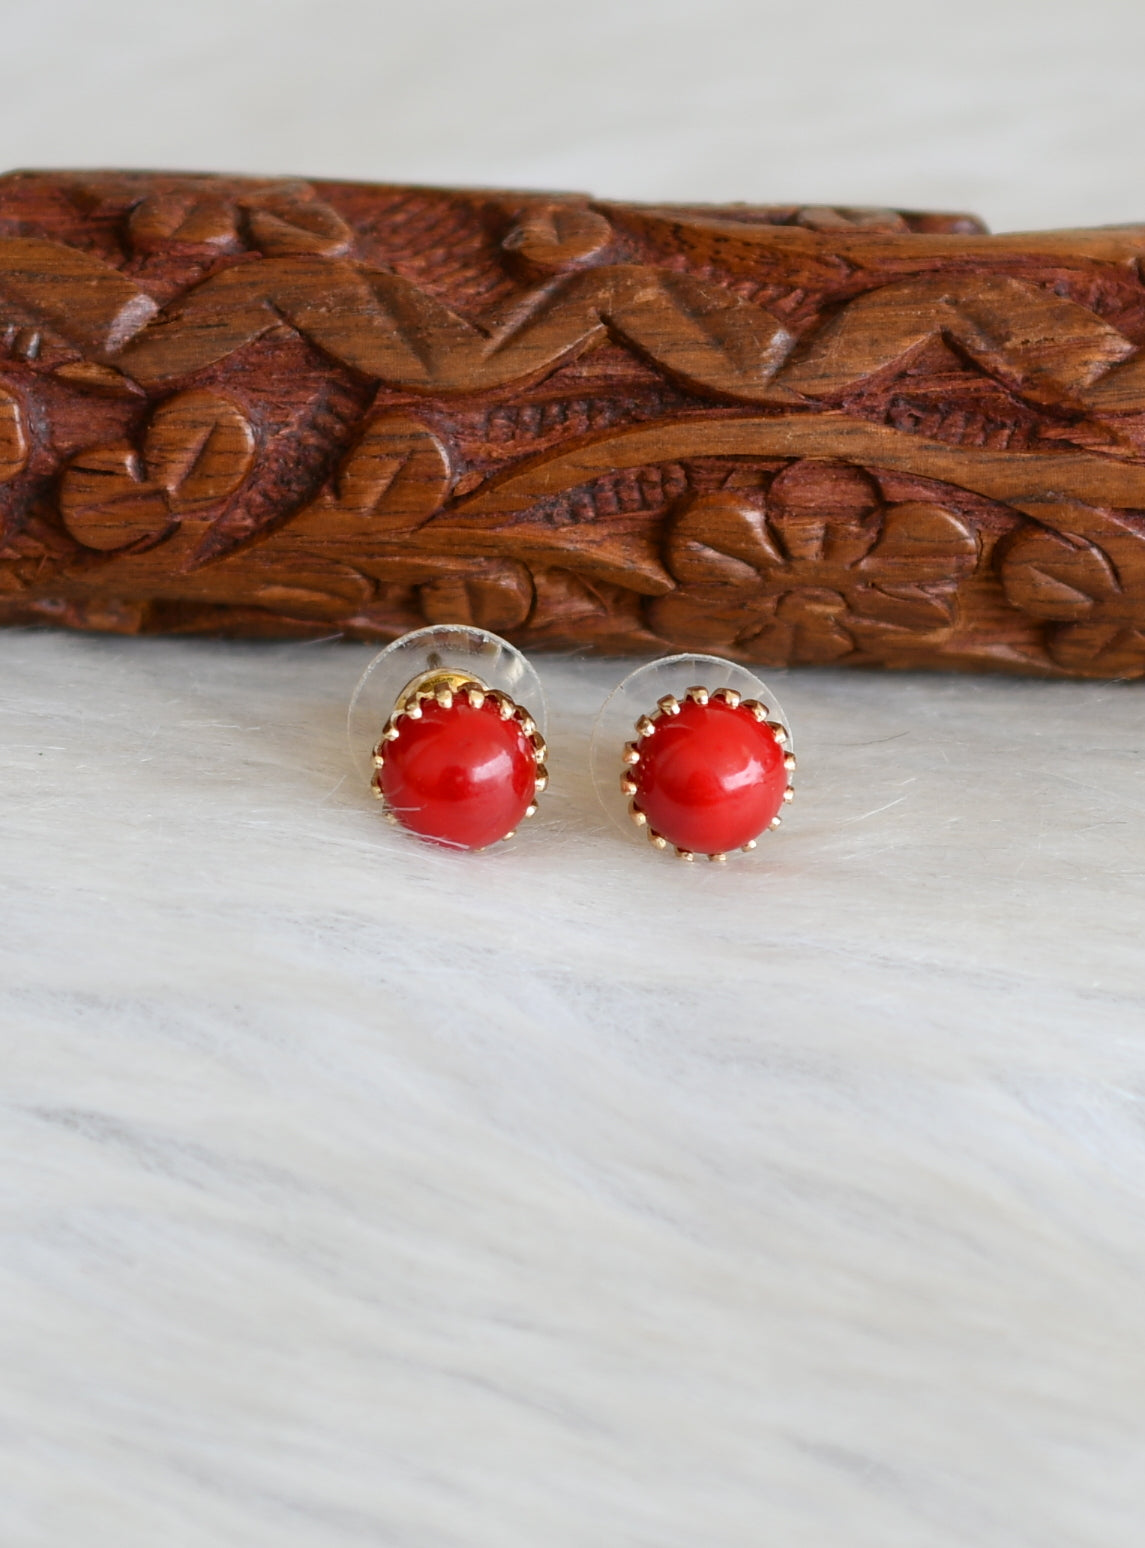 Pair of Antique Coral Earrings For Sale at 1stDibs | vintage coral earrings,  coral earrings vintage, antique coral drop earrings